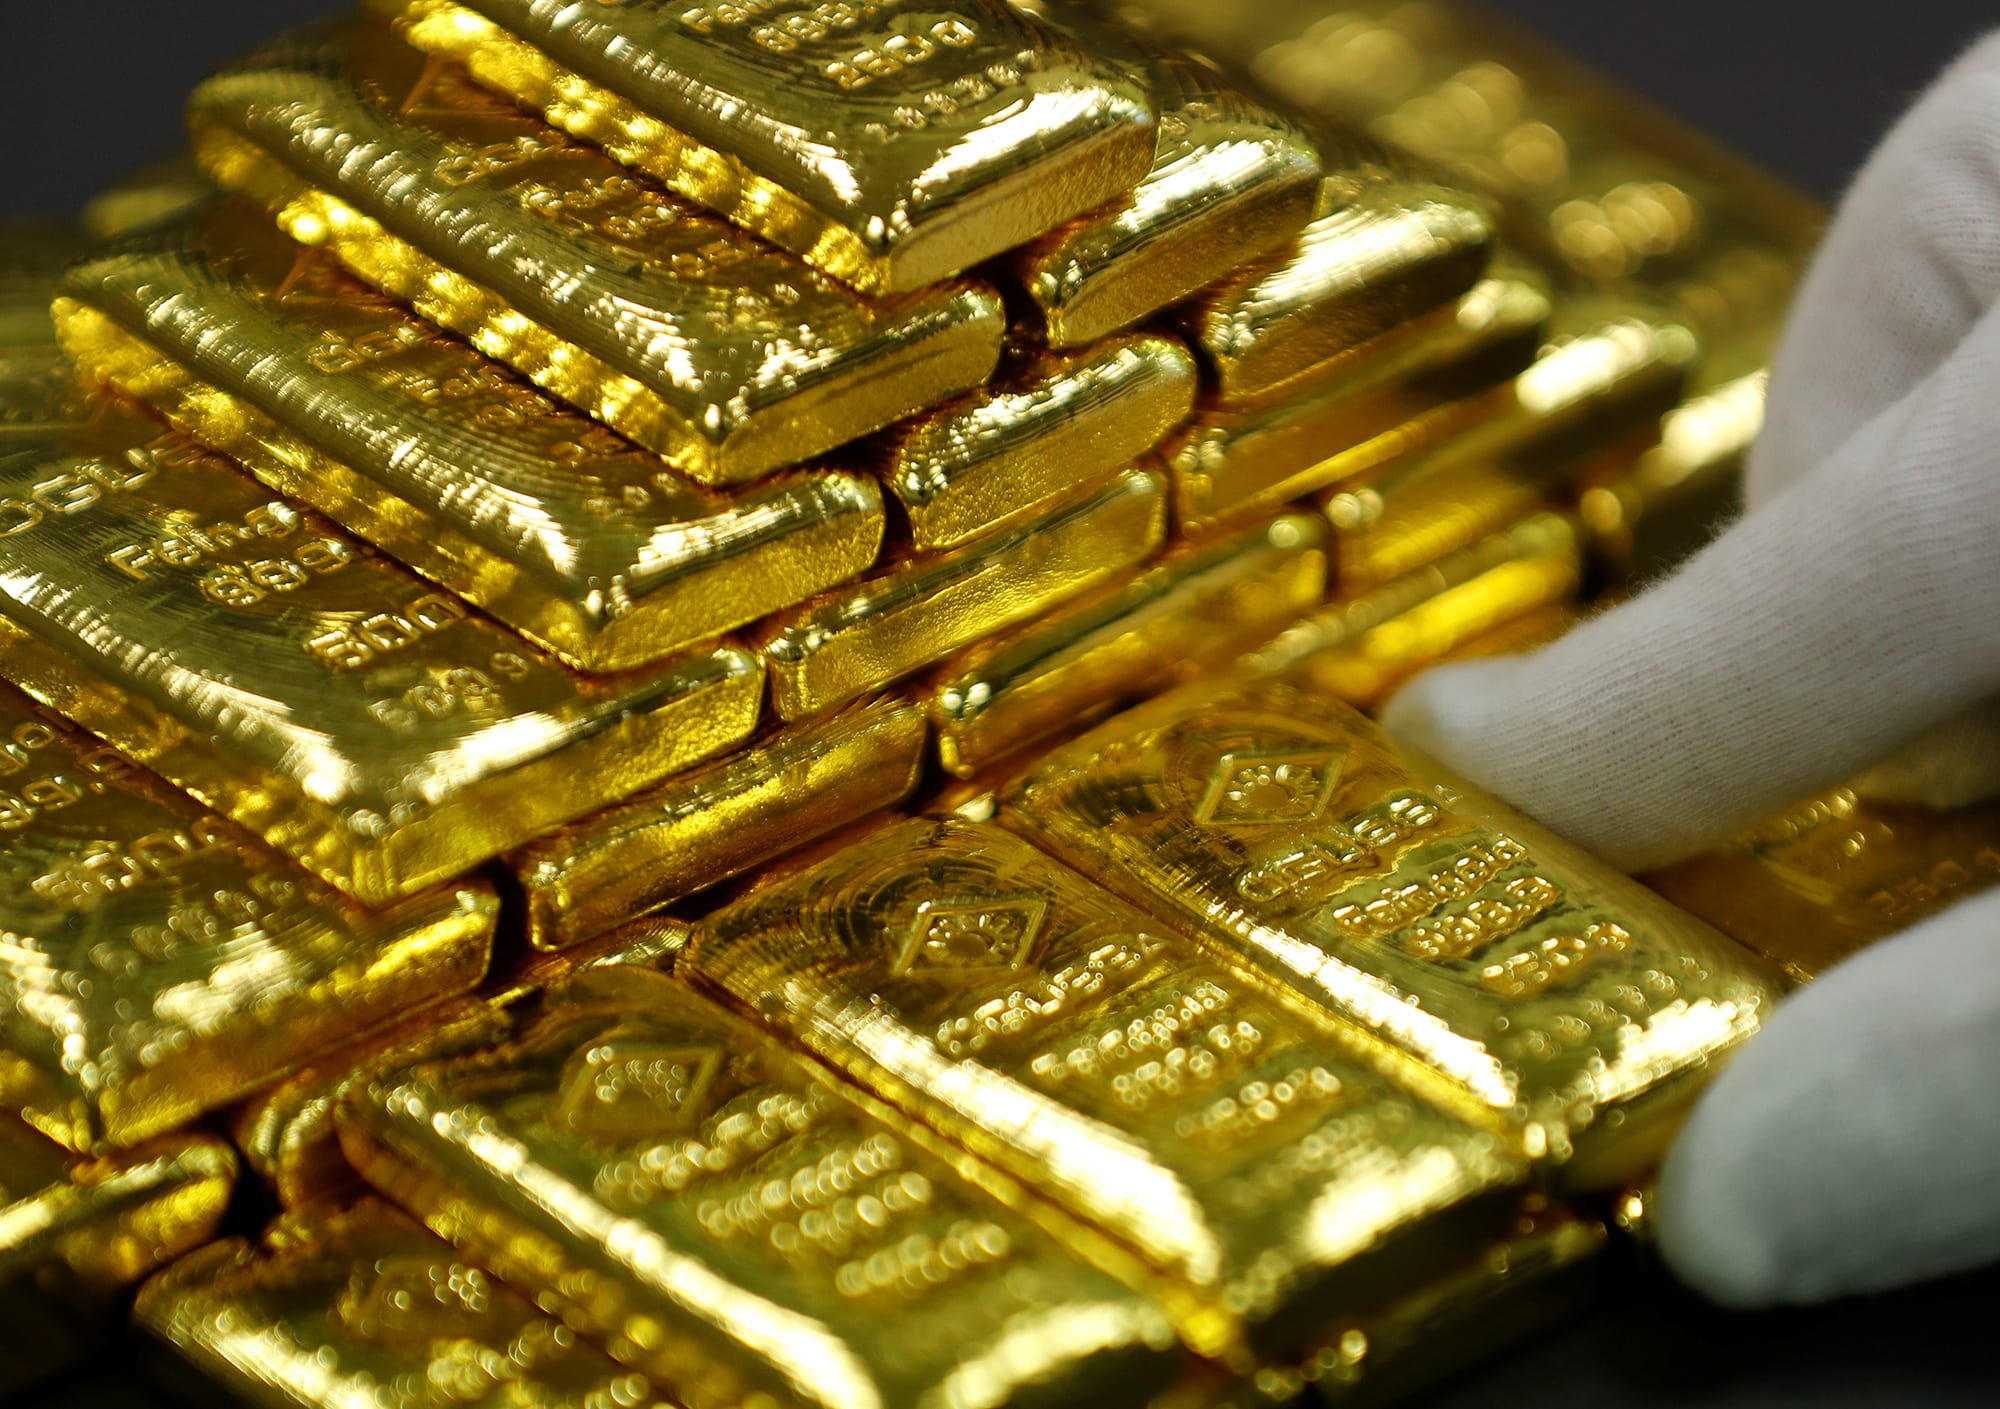 Gold likely to rise as global Covid-19 restrictions start to ease